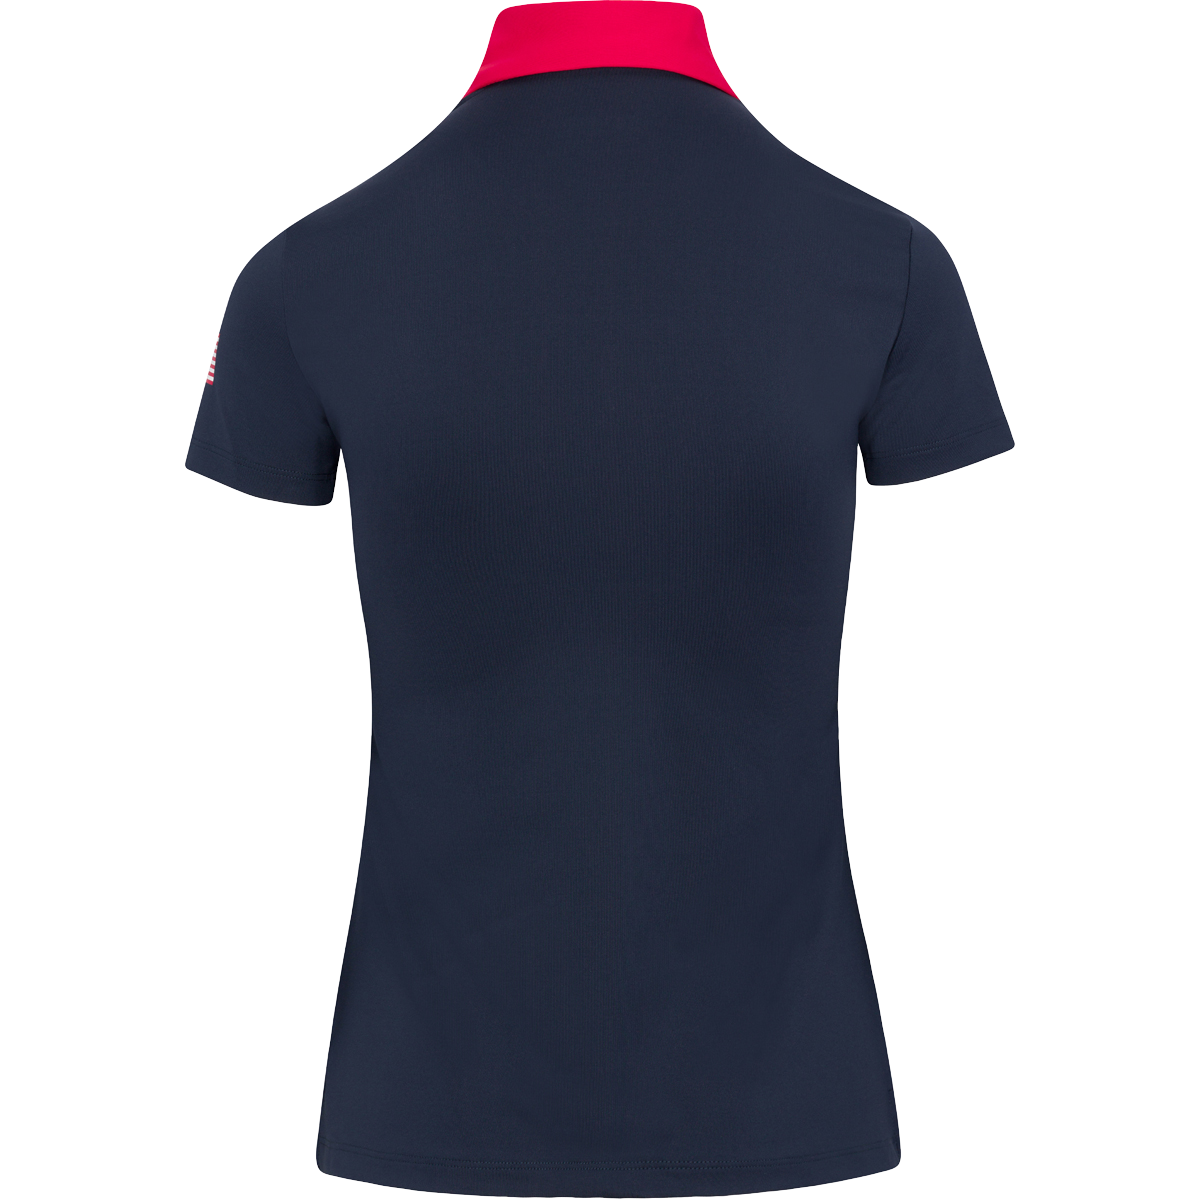 Dunning 2023 LPGA Official Solheim Cup Team Uniform Women's Short Sleeve Performance Polo in Halo / Glory - Back View